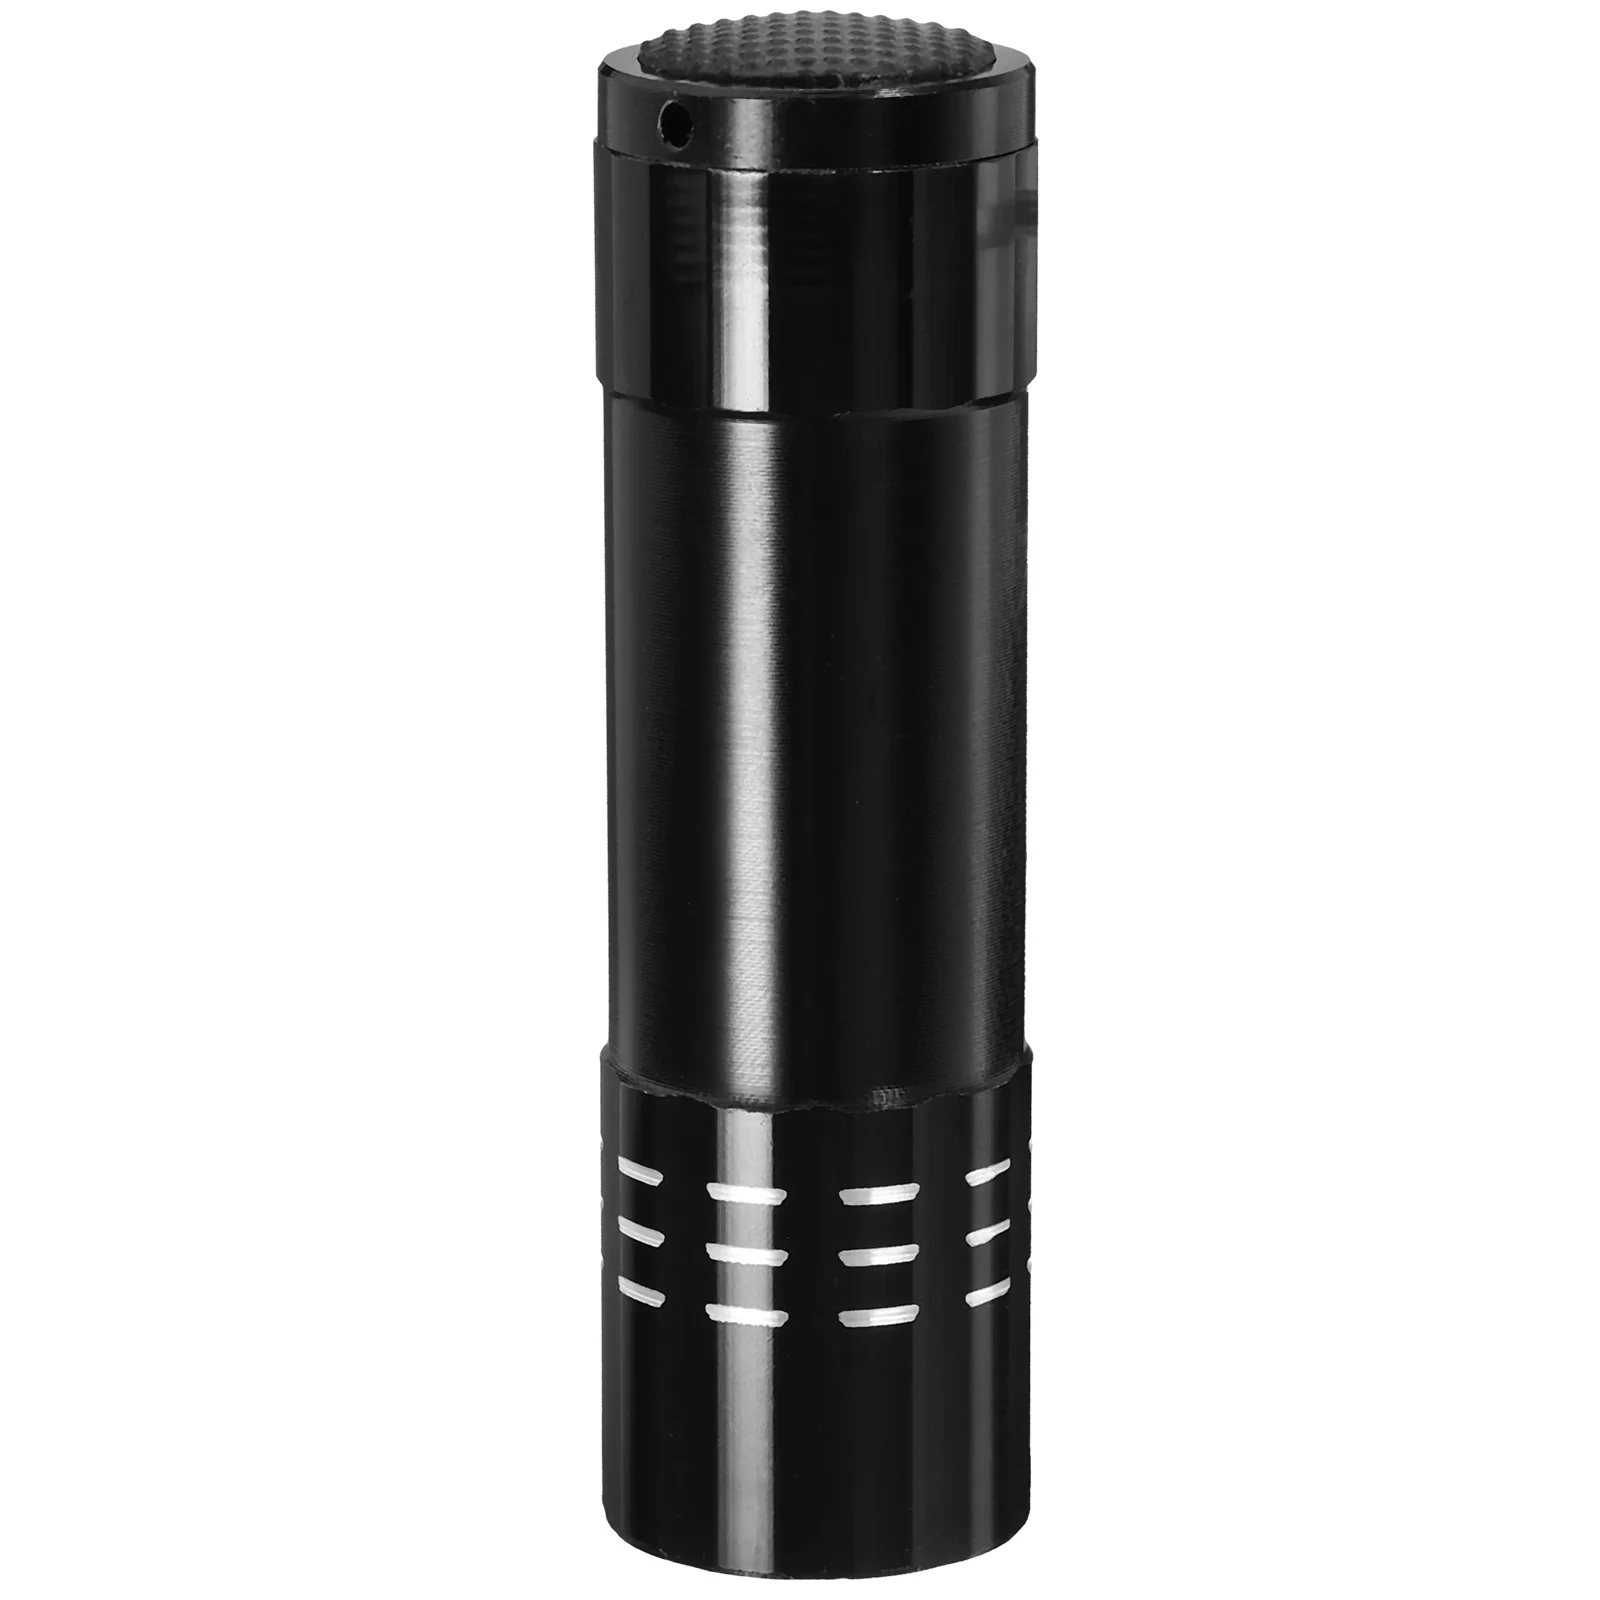 

Flashlight Hiding Box Diversion Safes Secret Storage Portable Can Hidden Container Aluminum Alloy Containers and